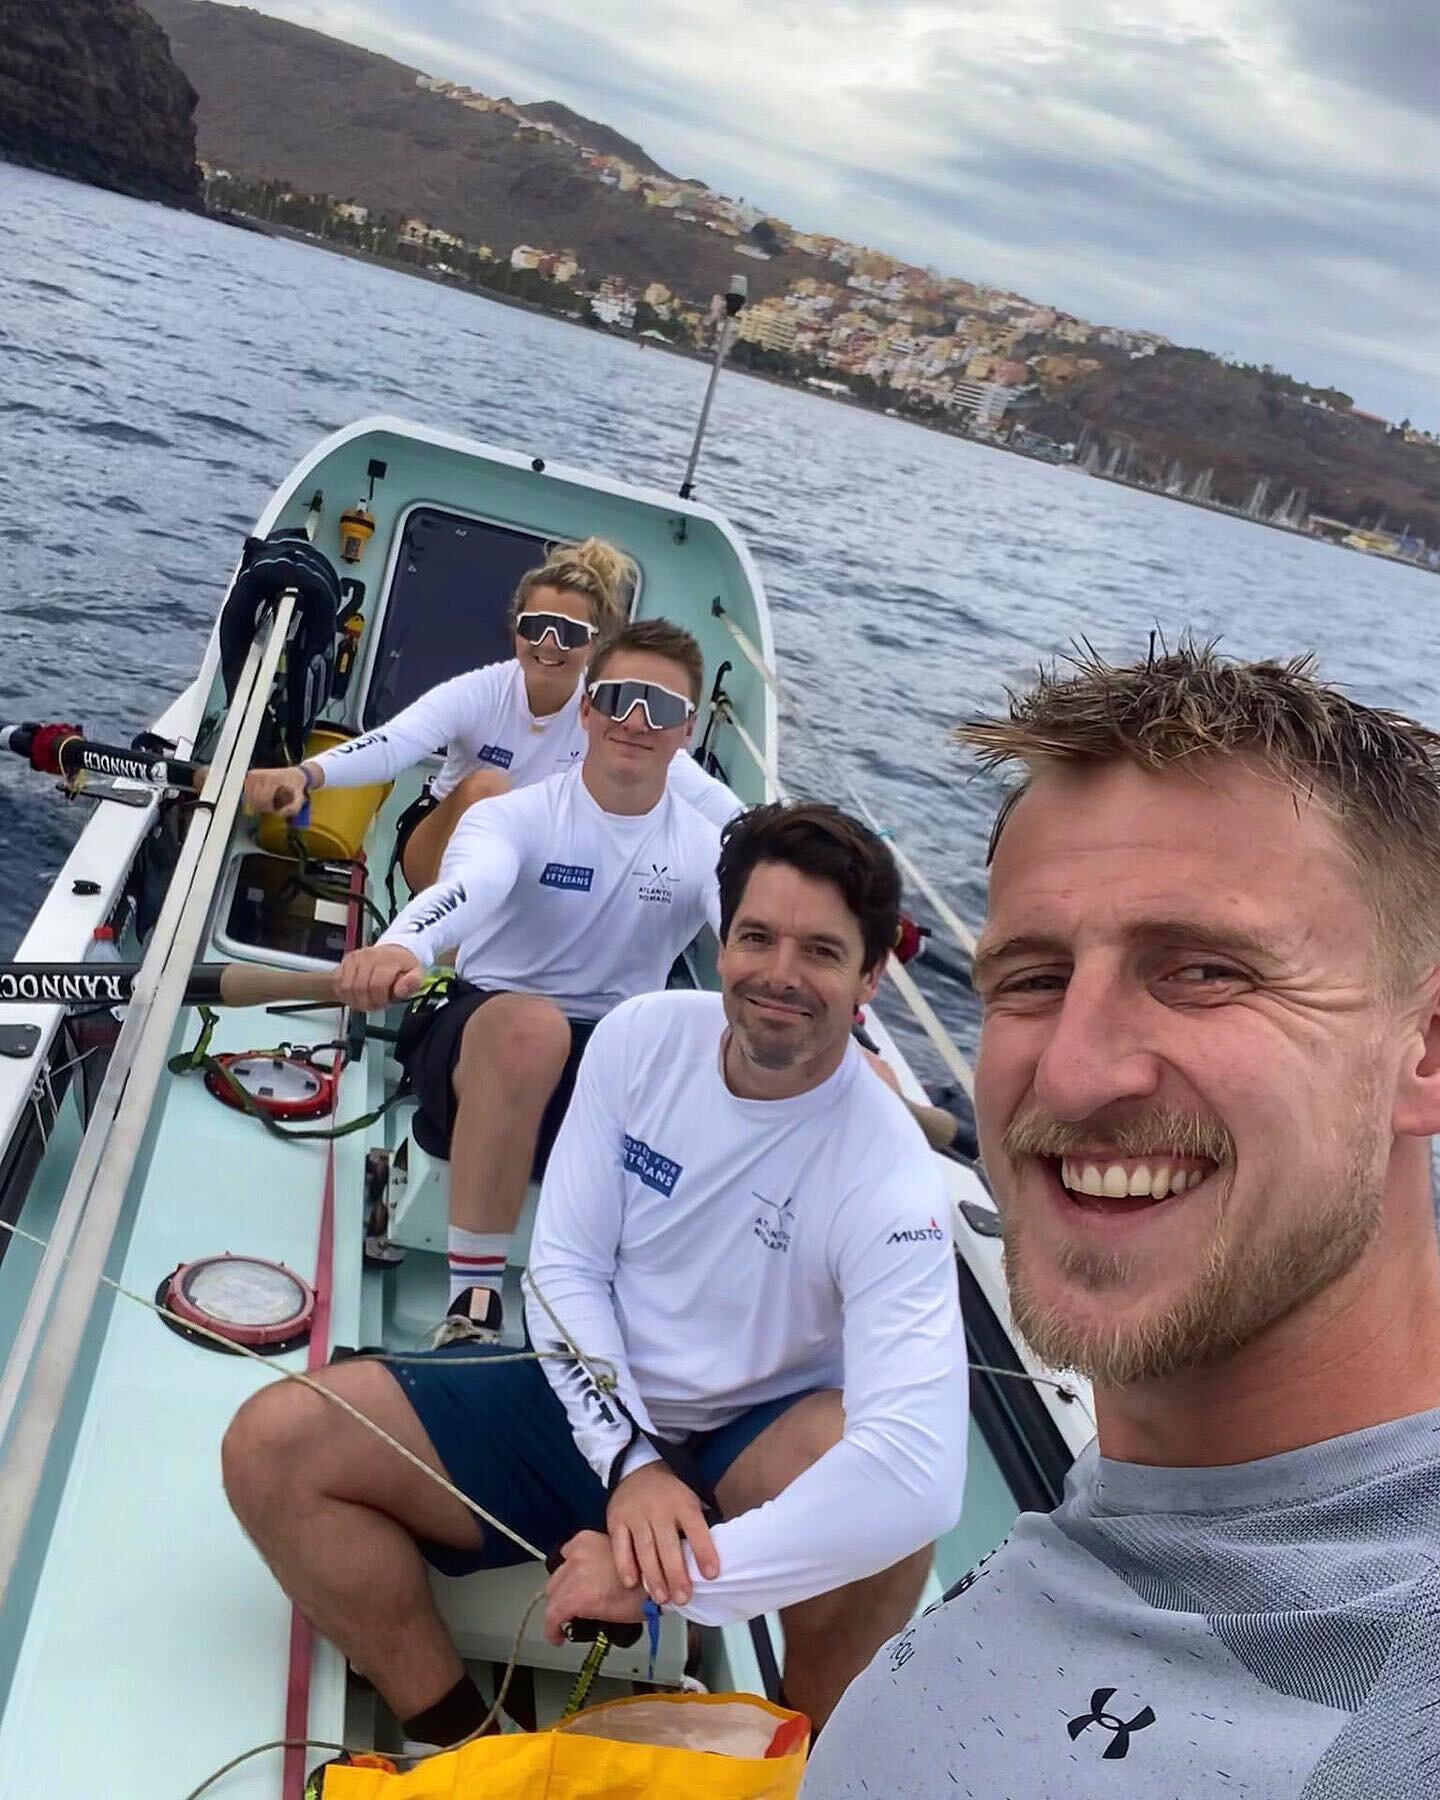 Last night our coach @duncroy1 set off from Amble, Northumberland to complete &lsquo;the last 18%&rsquo; of his 2020 circumnavigation row around Great Britain. With 283 nautical miles remaining, he is heading South to finish the final leg in Ramsgate